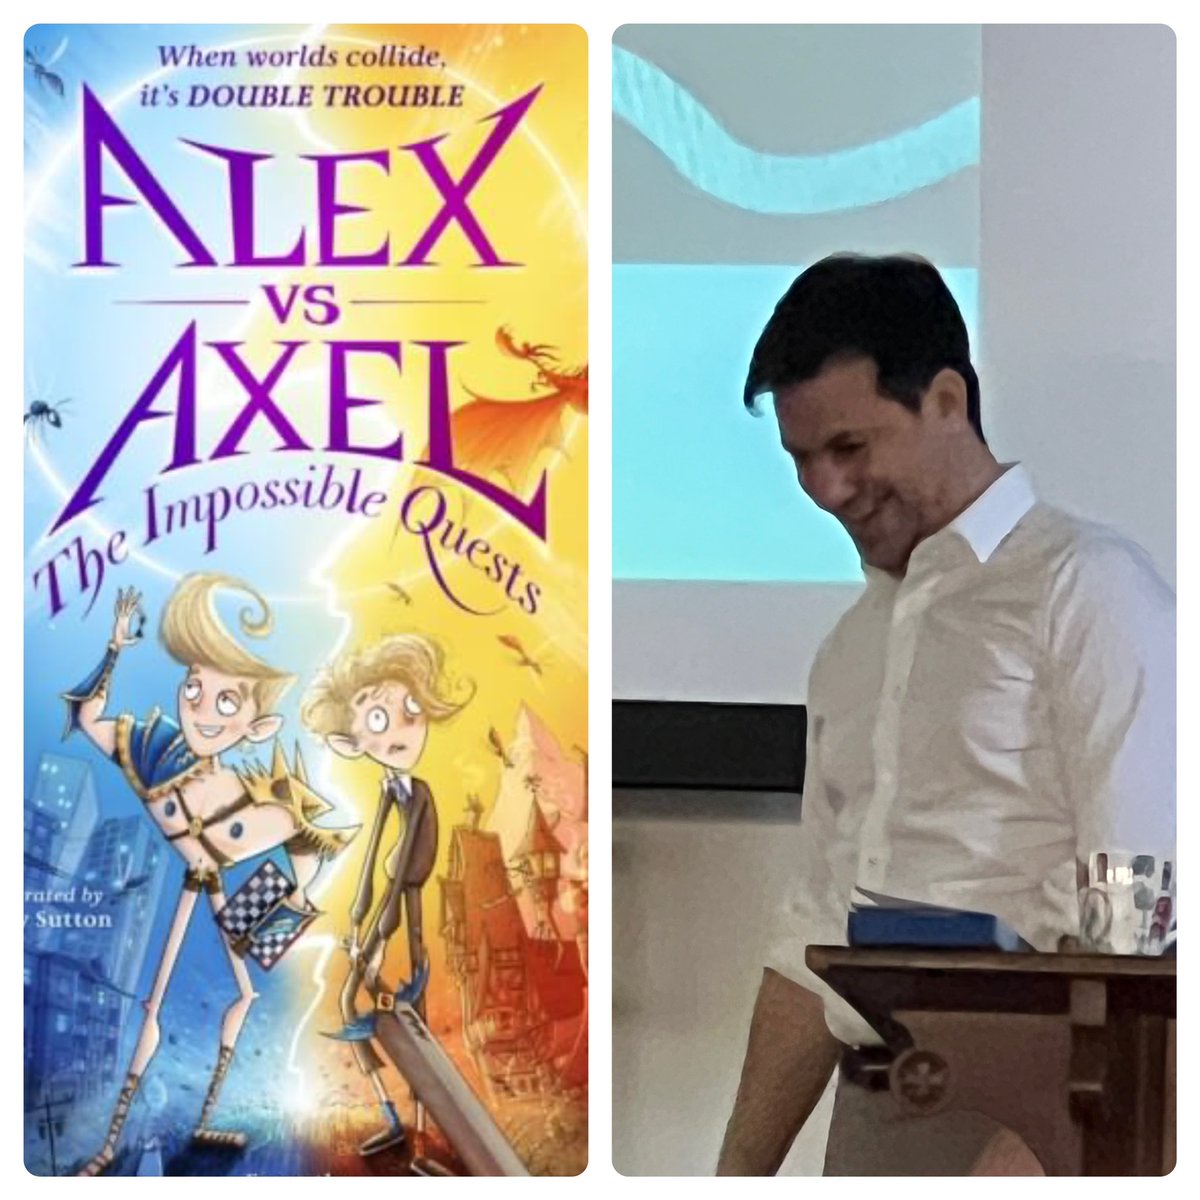 A morning of laughter at Christ Church Primary School, Berrylands today with author Sam Copeland @stubbleagent #authorevent @PuffinBooks #AlexvsAxel